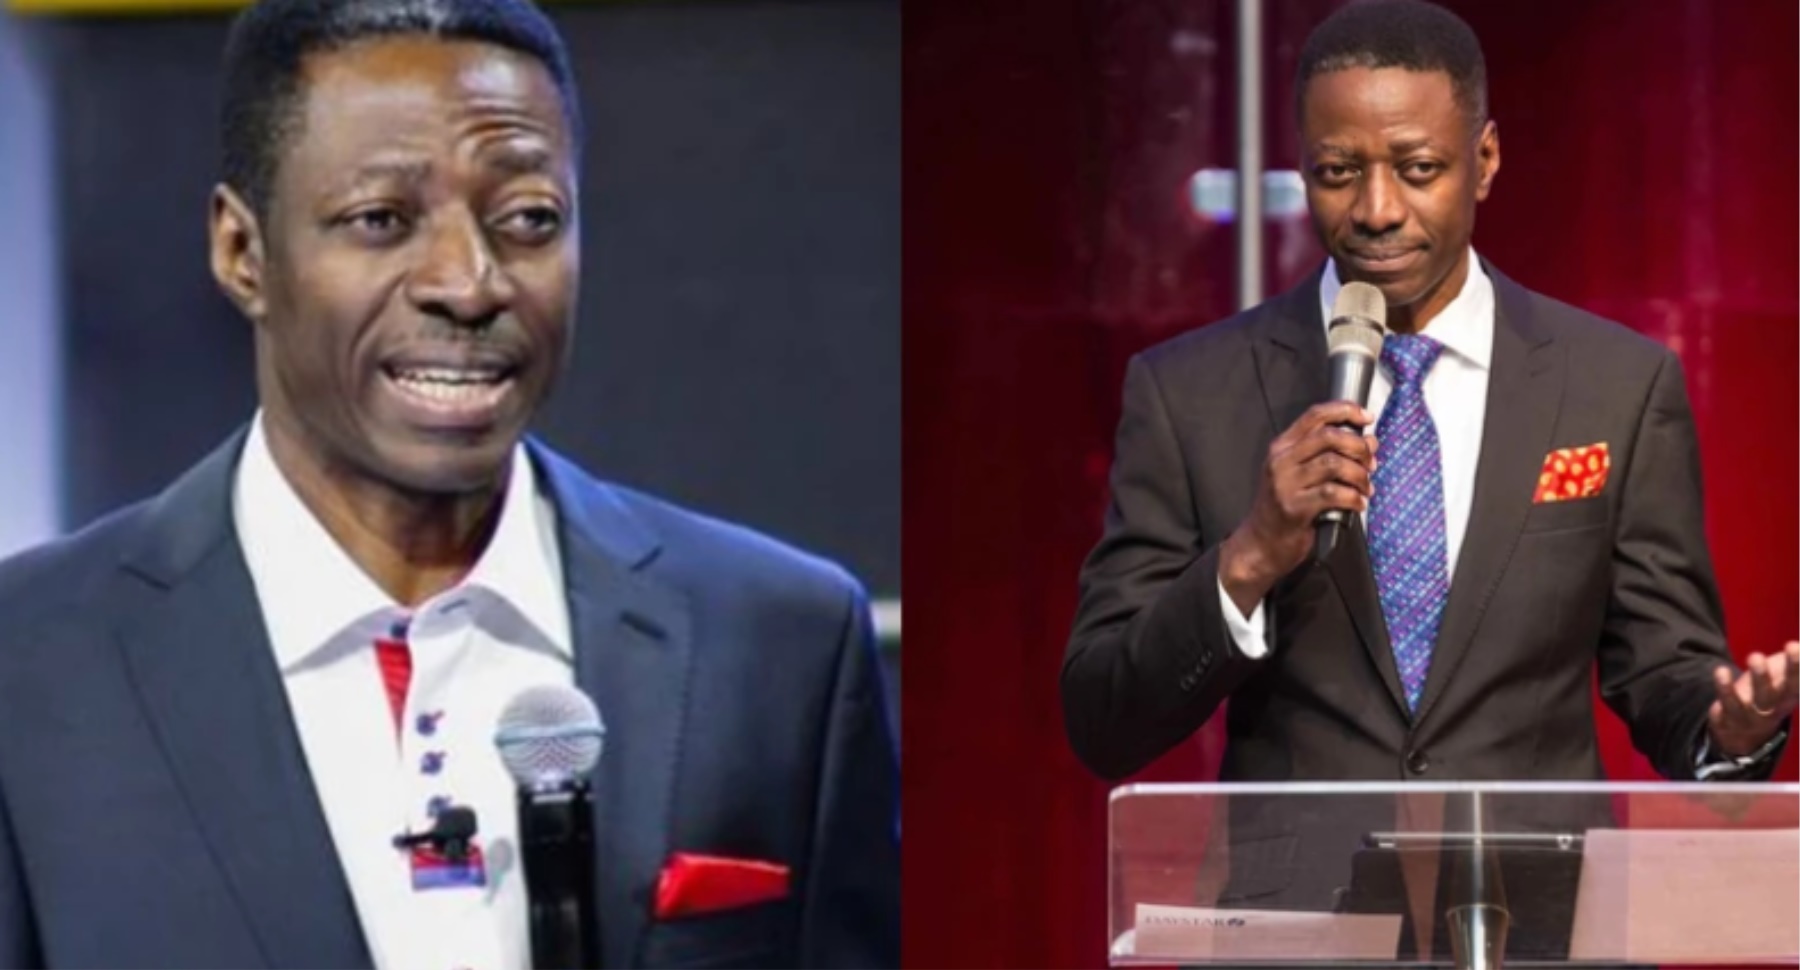 Senior pastor of popular church causes massive stir; says no Christian should feel guilty for not paying tithe